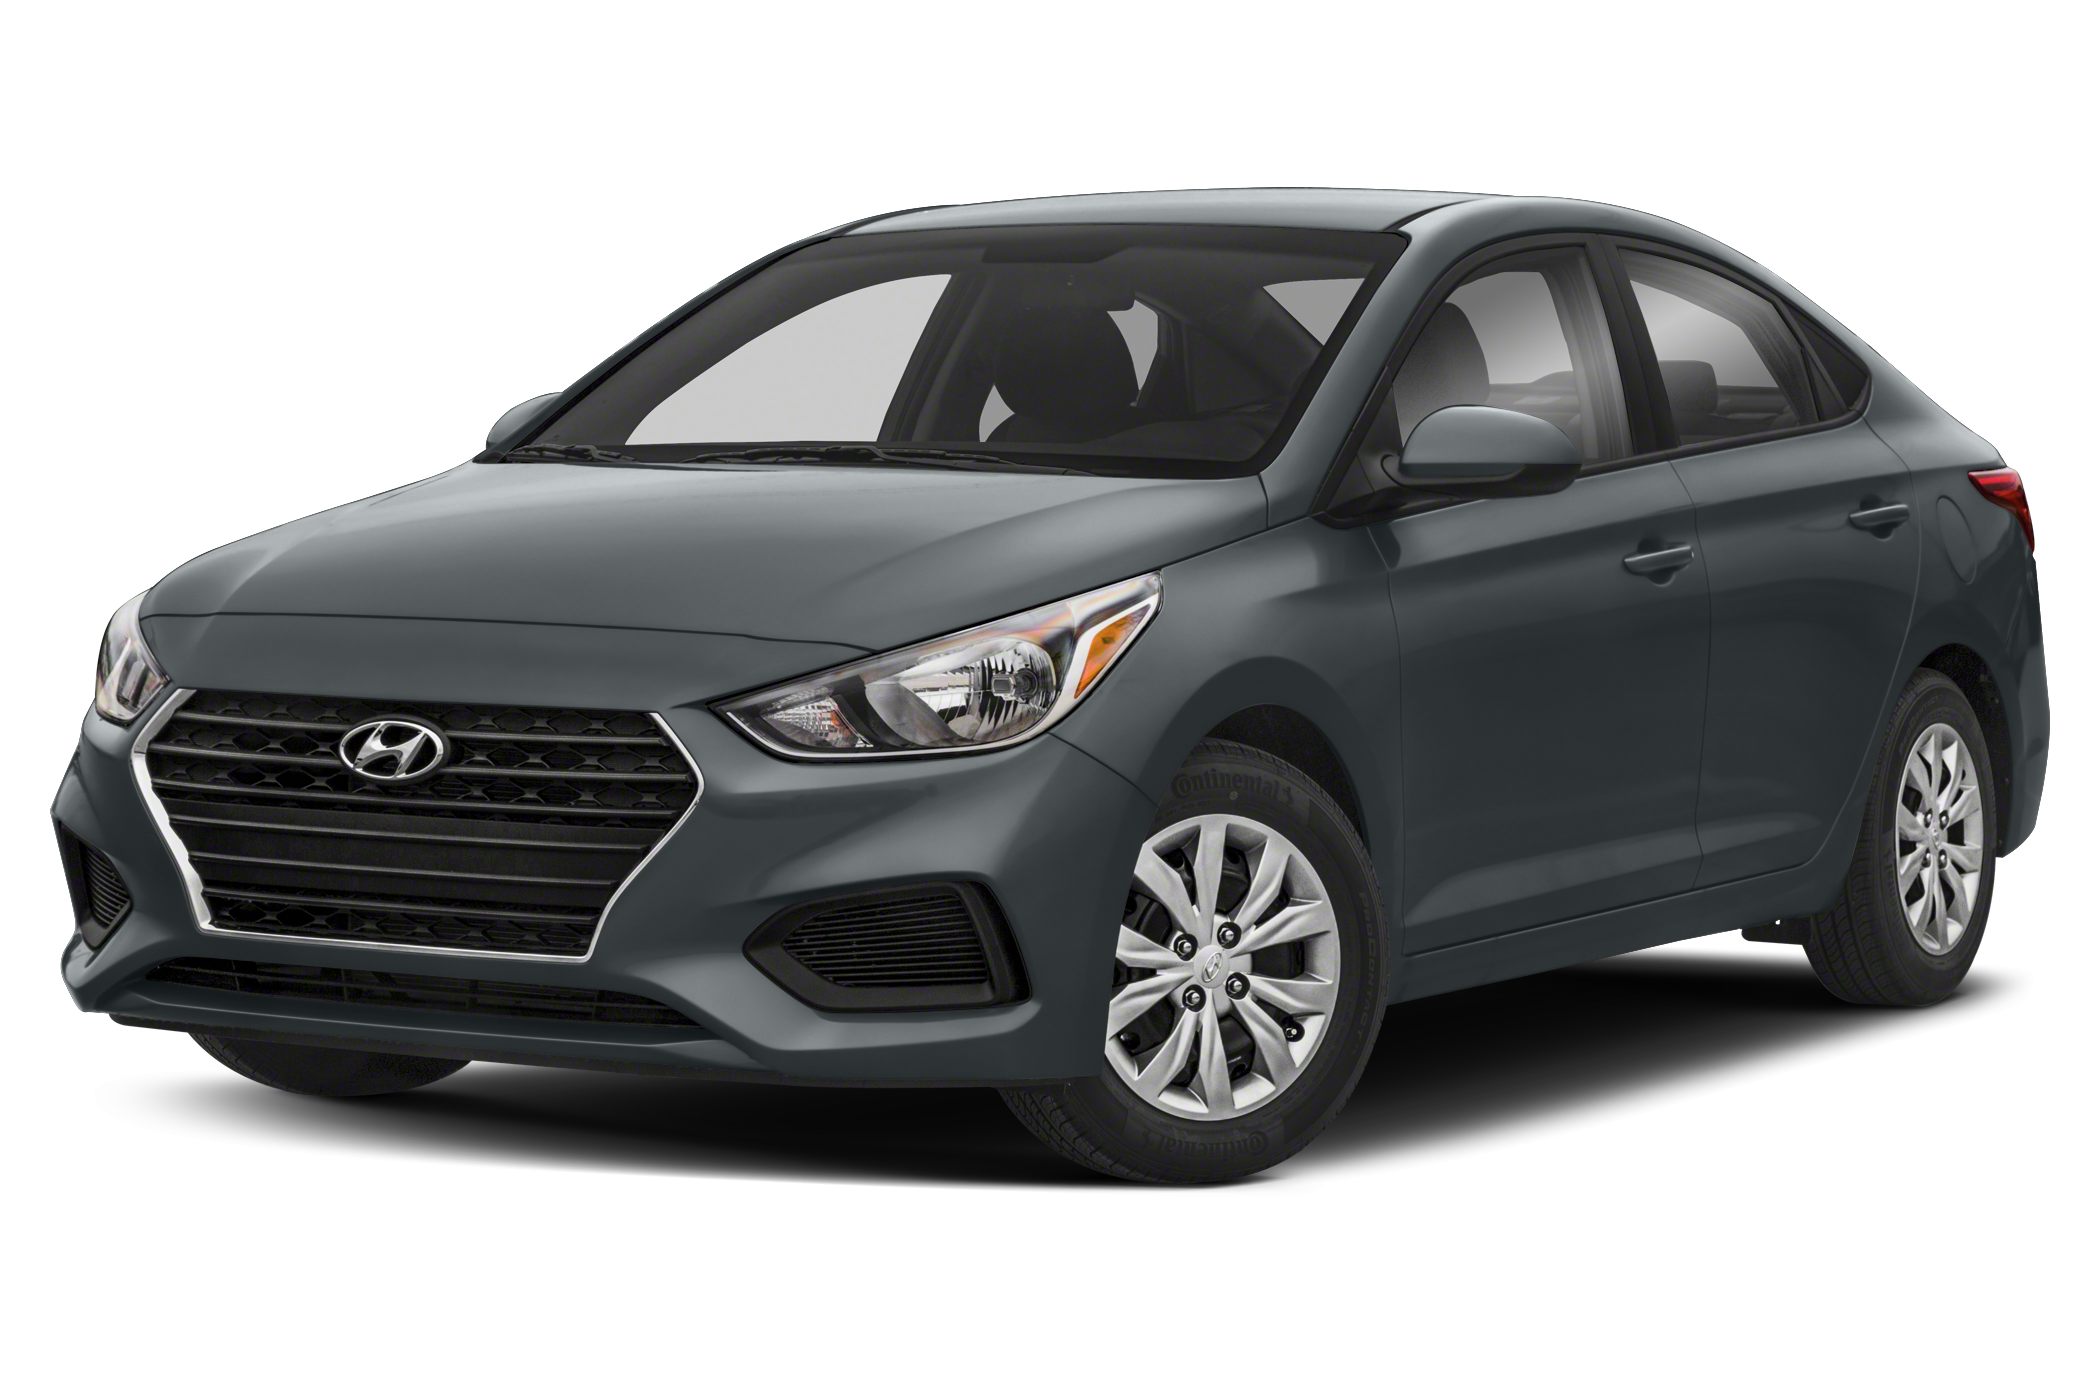 2020 Hyundai Accent Drivers' Notes Review | Driving impressions ...